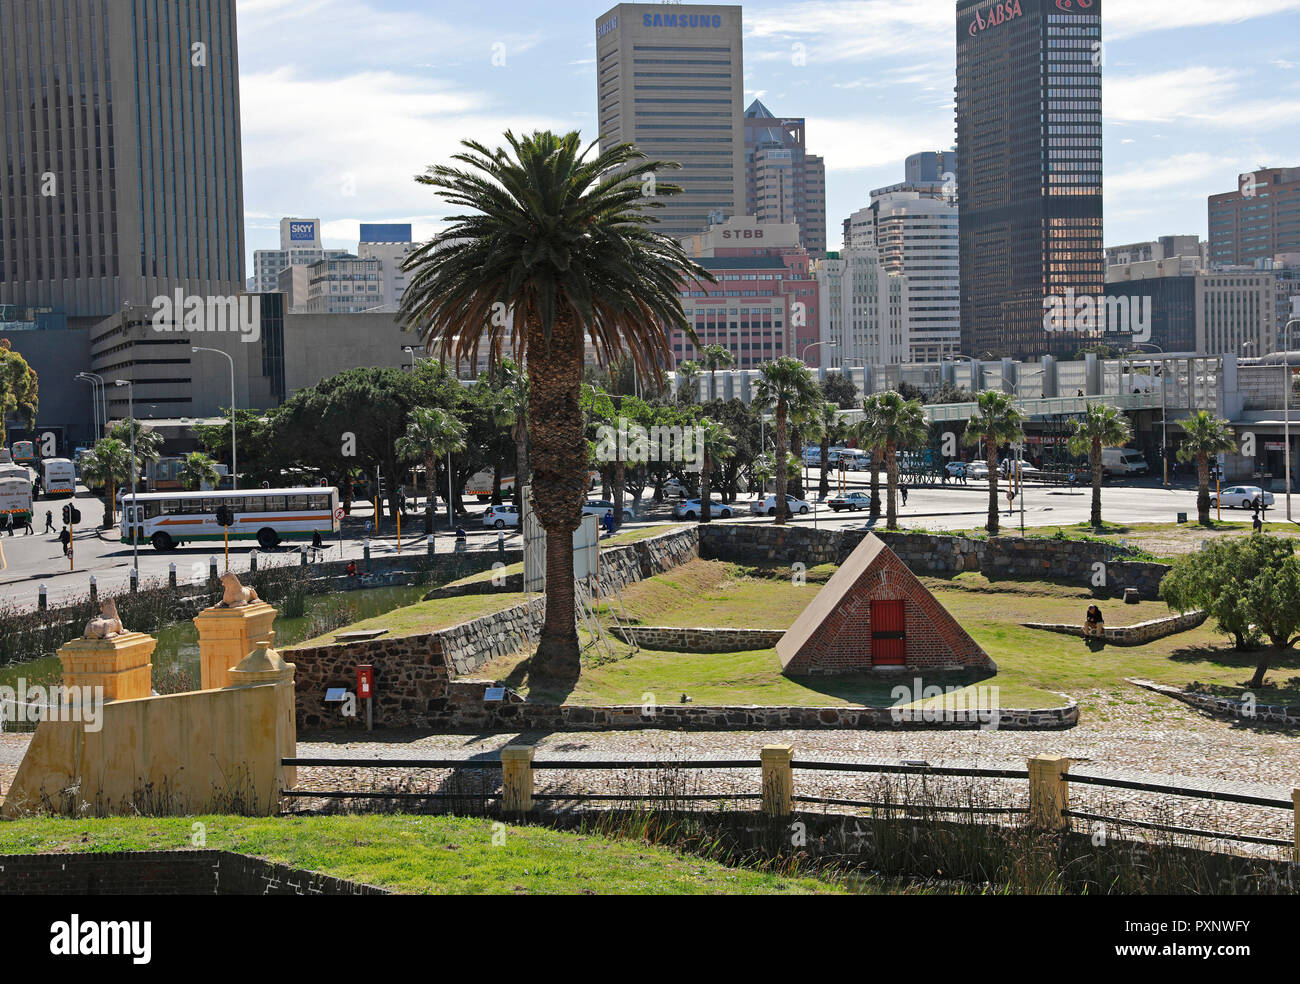 View of Cape Town CBD from the Cape of Good Hope, South Africa. Stock Photo